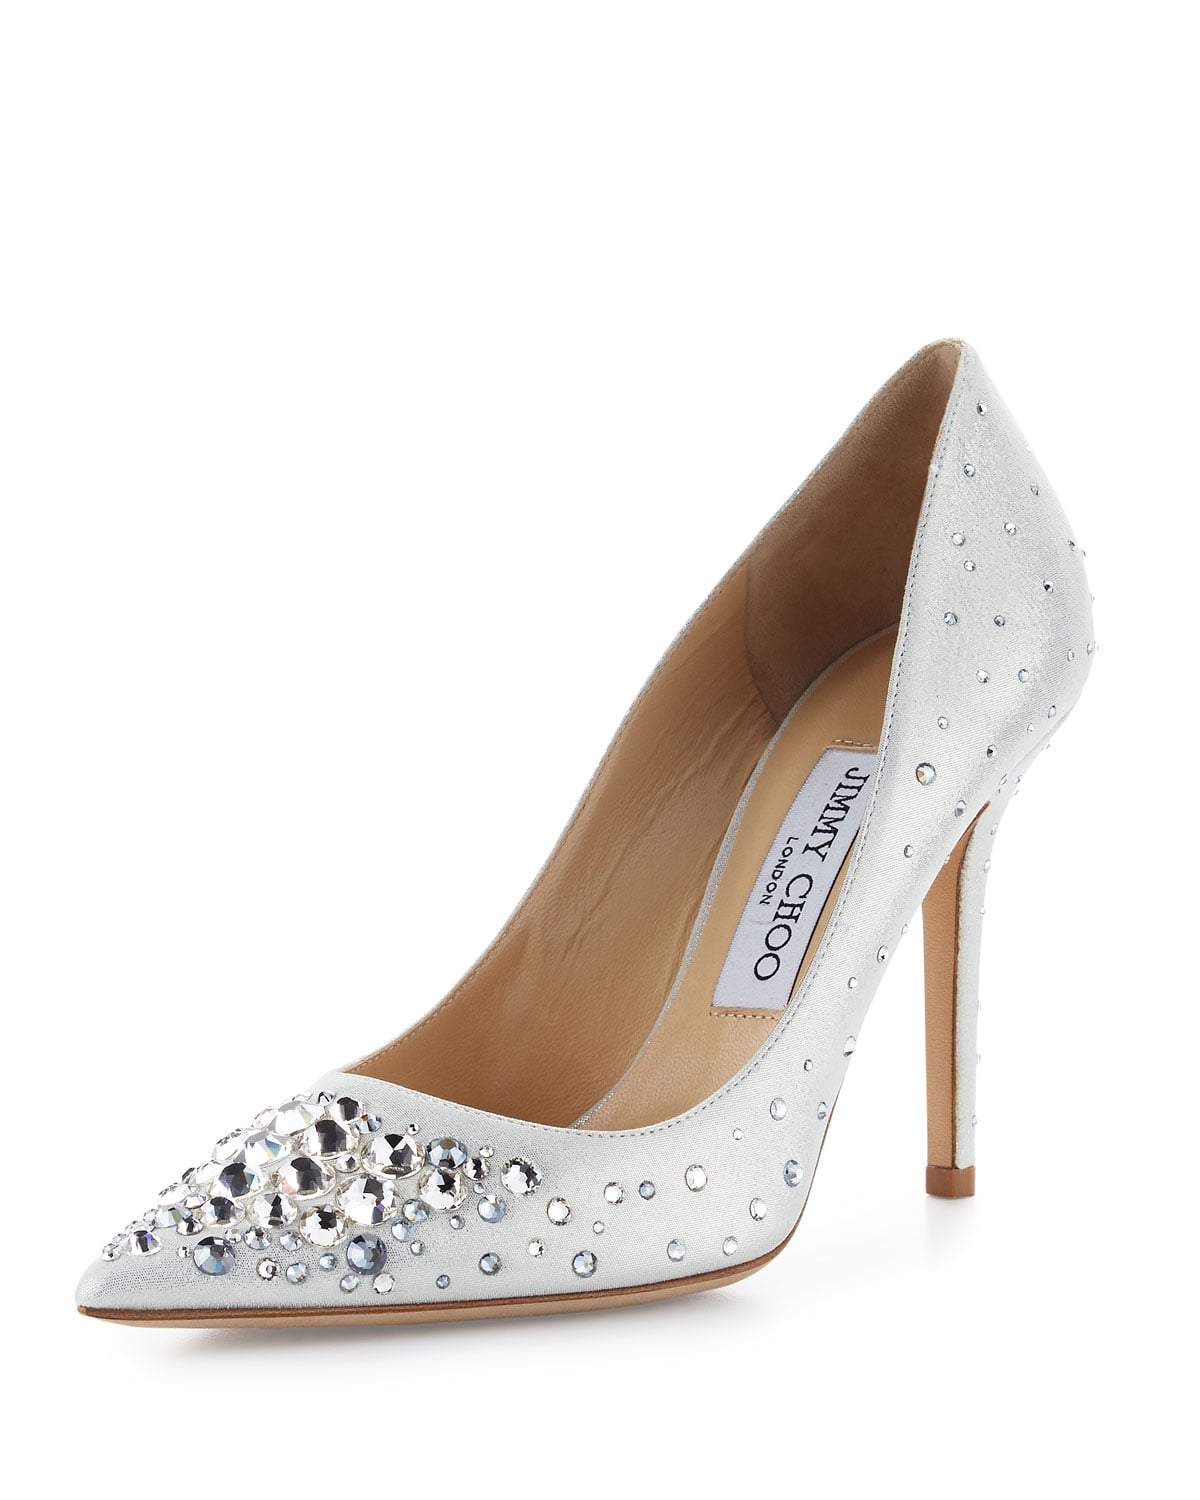 Jimmy Choo Abel Crystal Pumps | Kate Upton's Sparkly Wedding Shoes Might Have Been Hidden, but Deserve Your Utmost Attention | POPSUGAR Fashion Photo 8